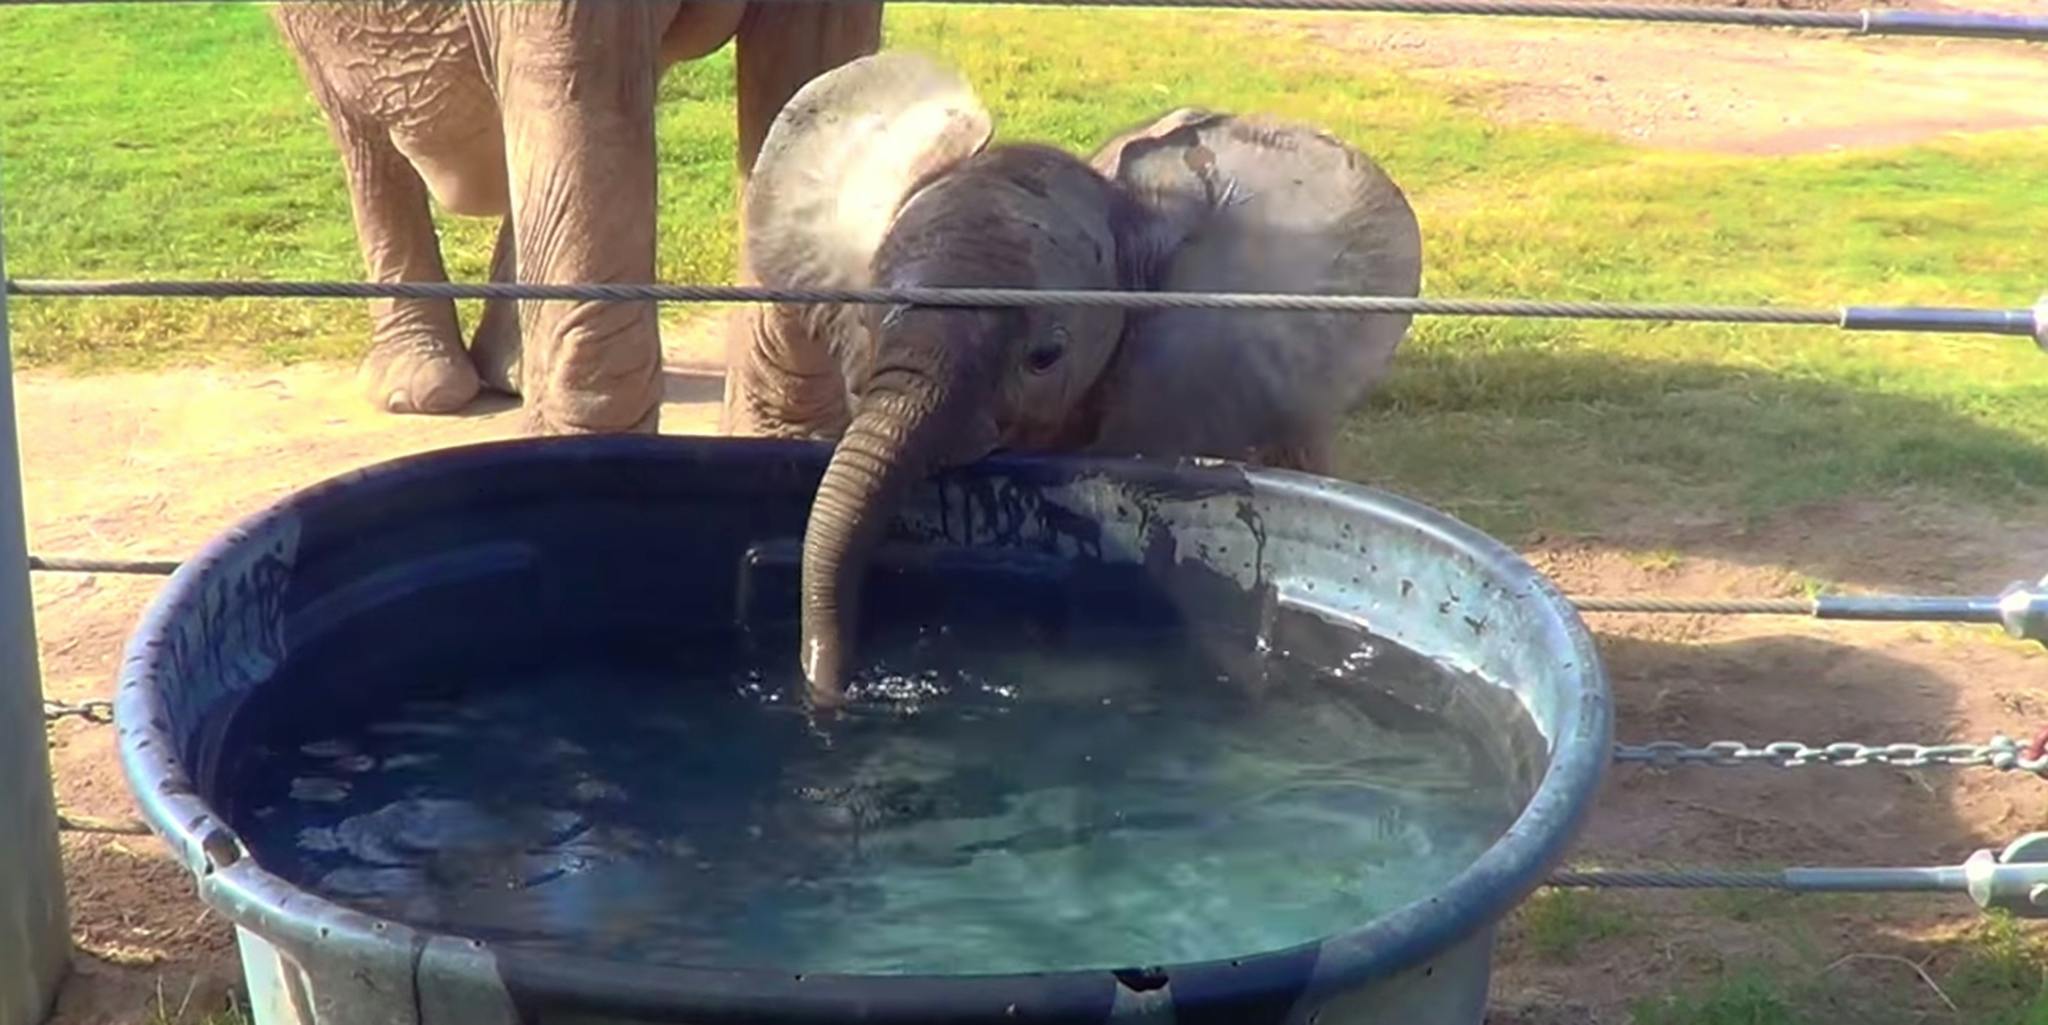 Baby Elephant And Girl Ki Porn Video - This baby elephant is having way too much fun blowing bubbles